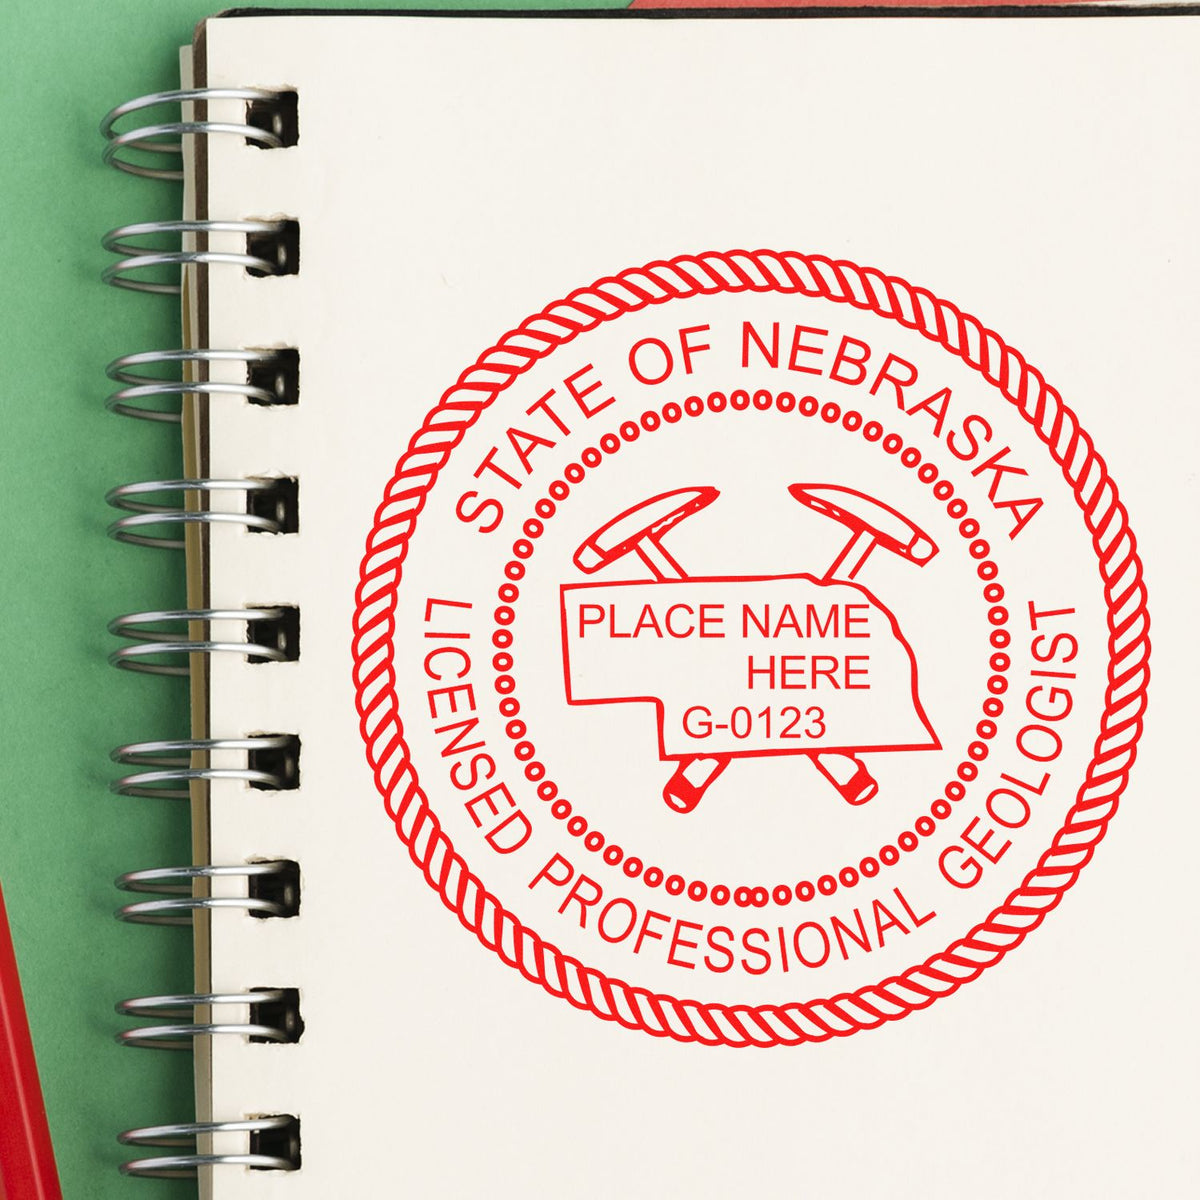 An in use photo of the Slim Pre-Inked Nebraska Professional Geologist Seal Stamp showing a sample imprint on a cardstock